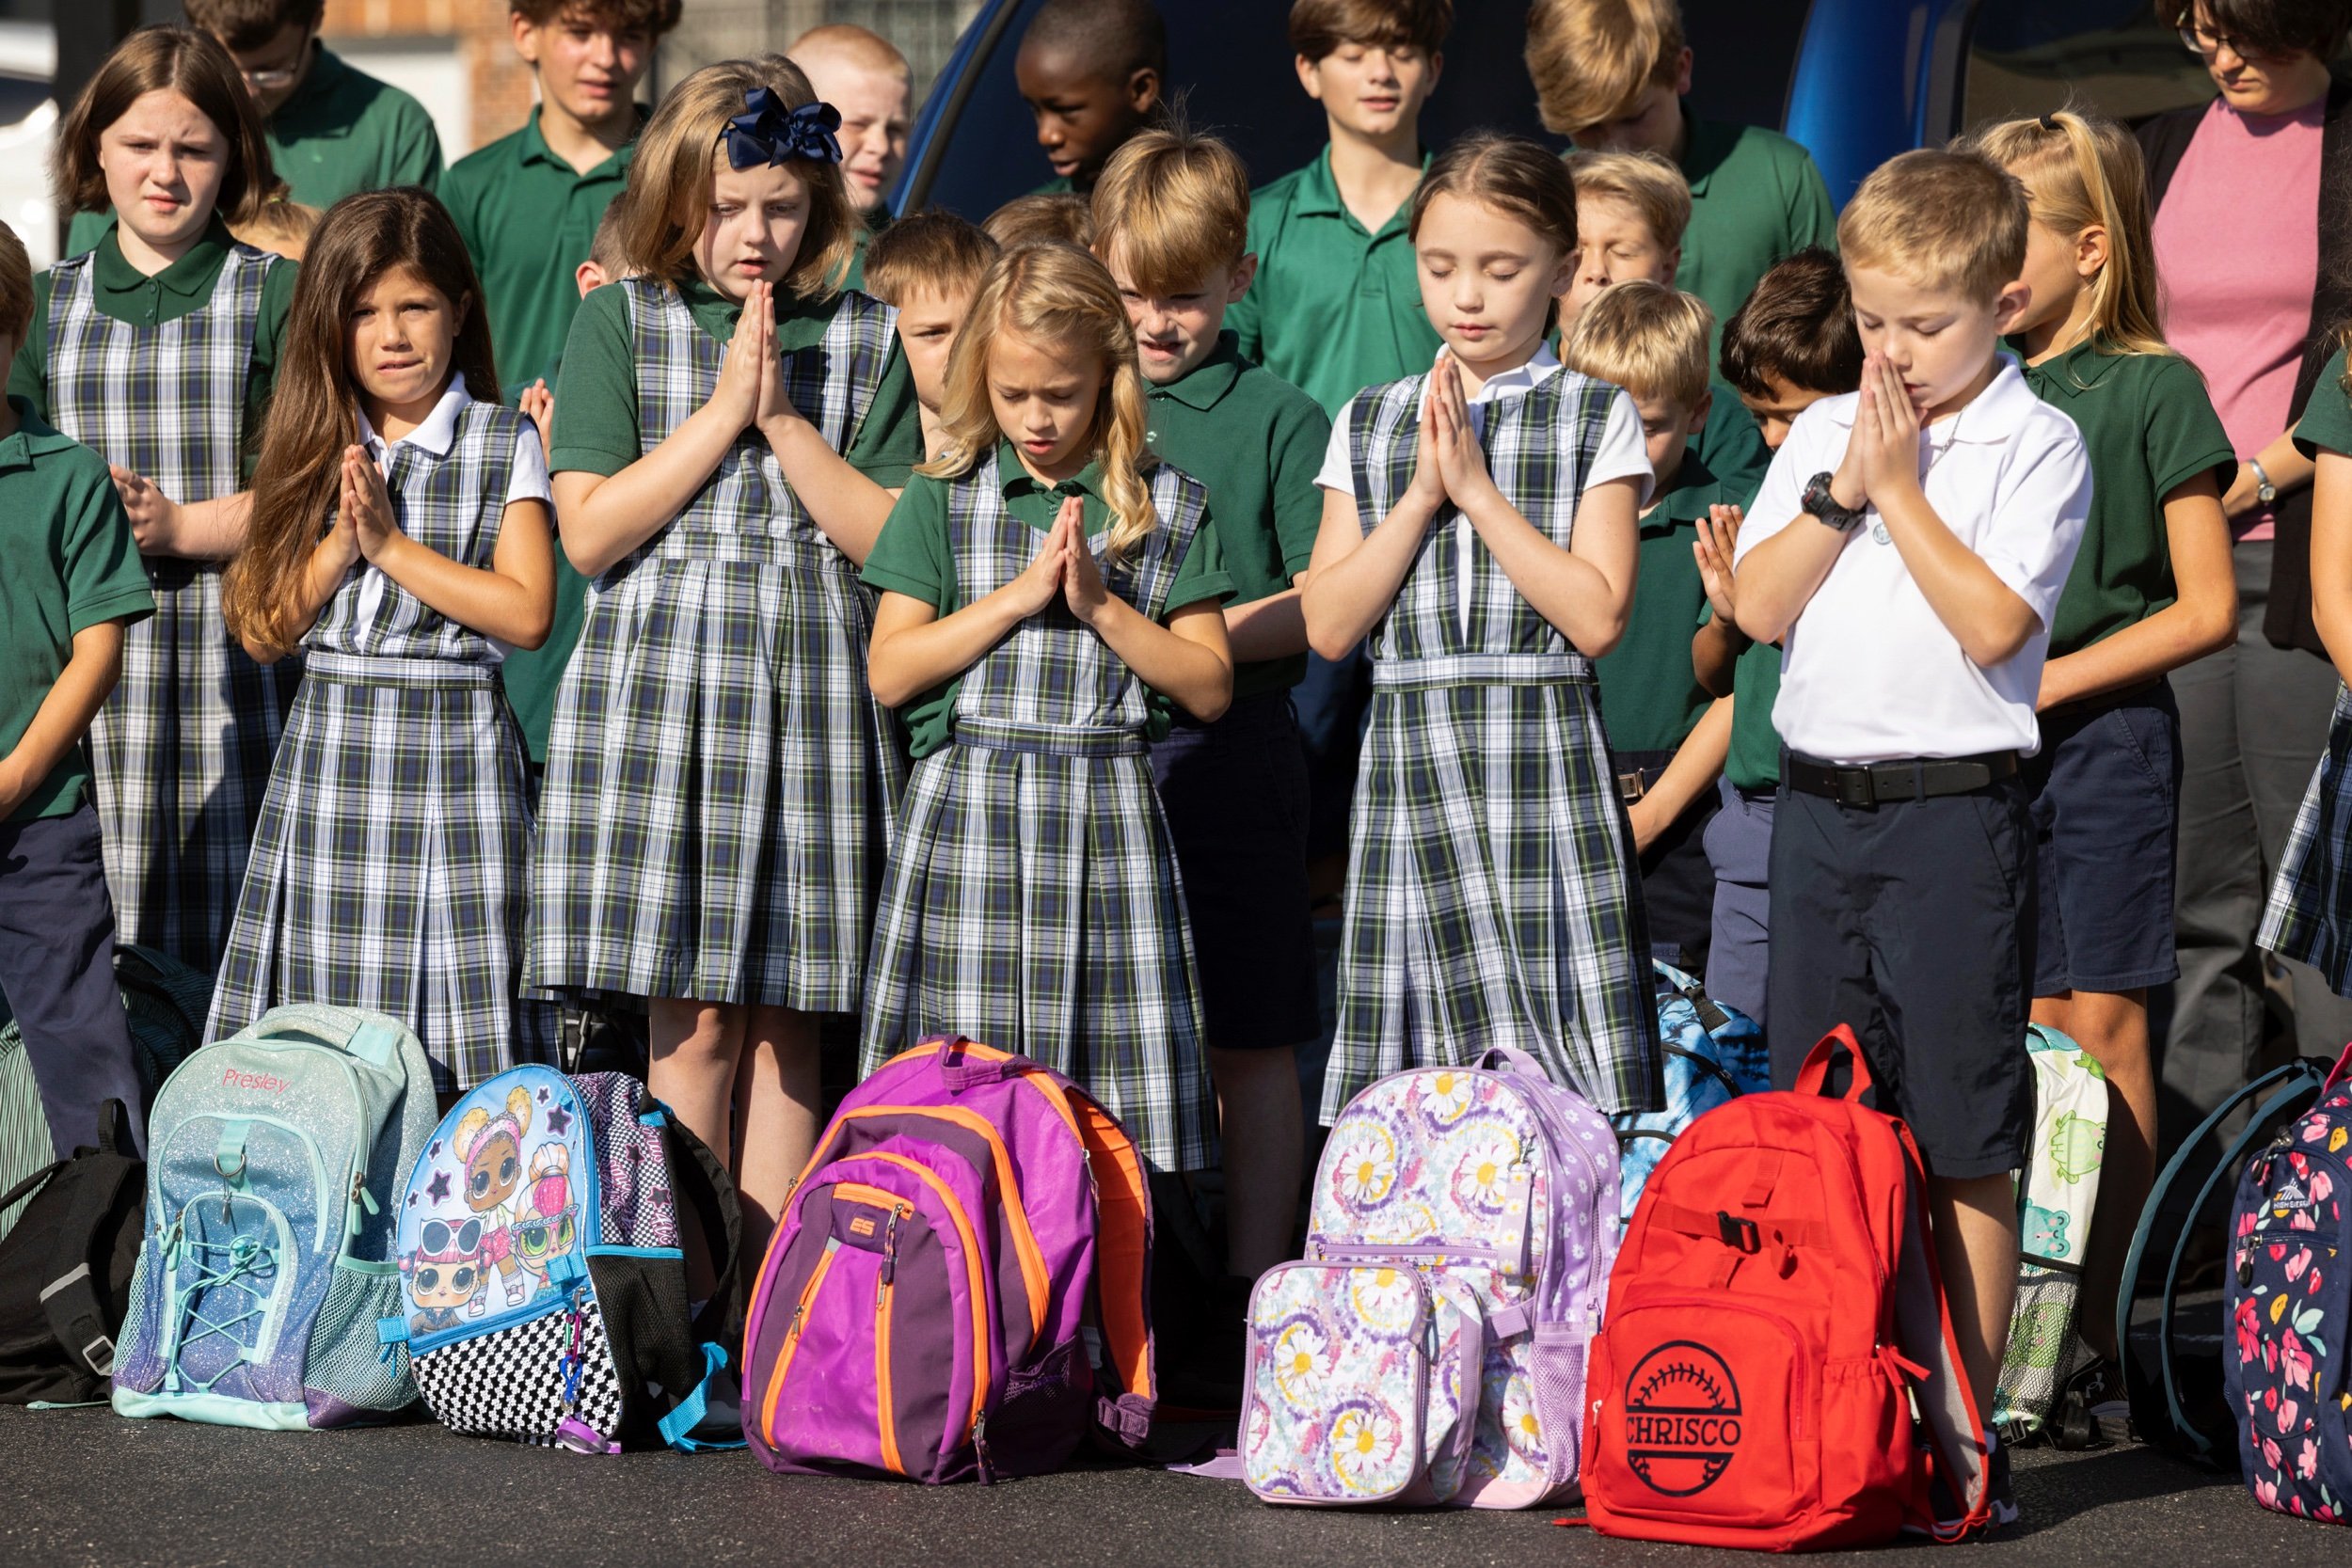  Students, with backpacks ready to be blessed by Father Daniel G. Shaughnessy, folded their hands in prayer on the first day of school Aug. 17 at Saint Joseph School in Imperial, Missouri. 